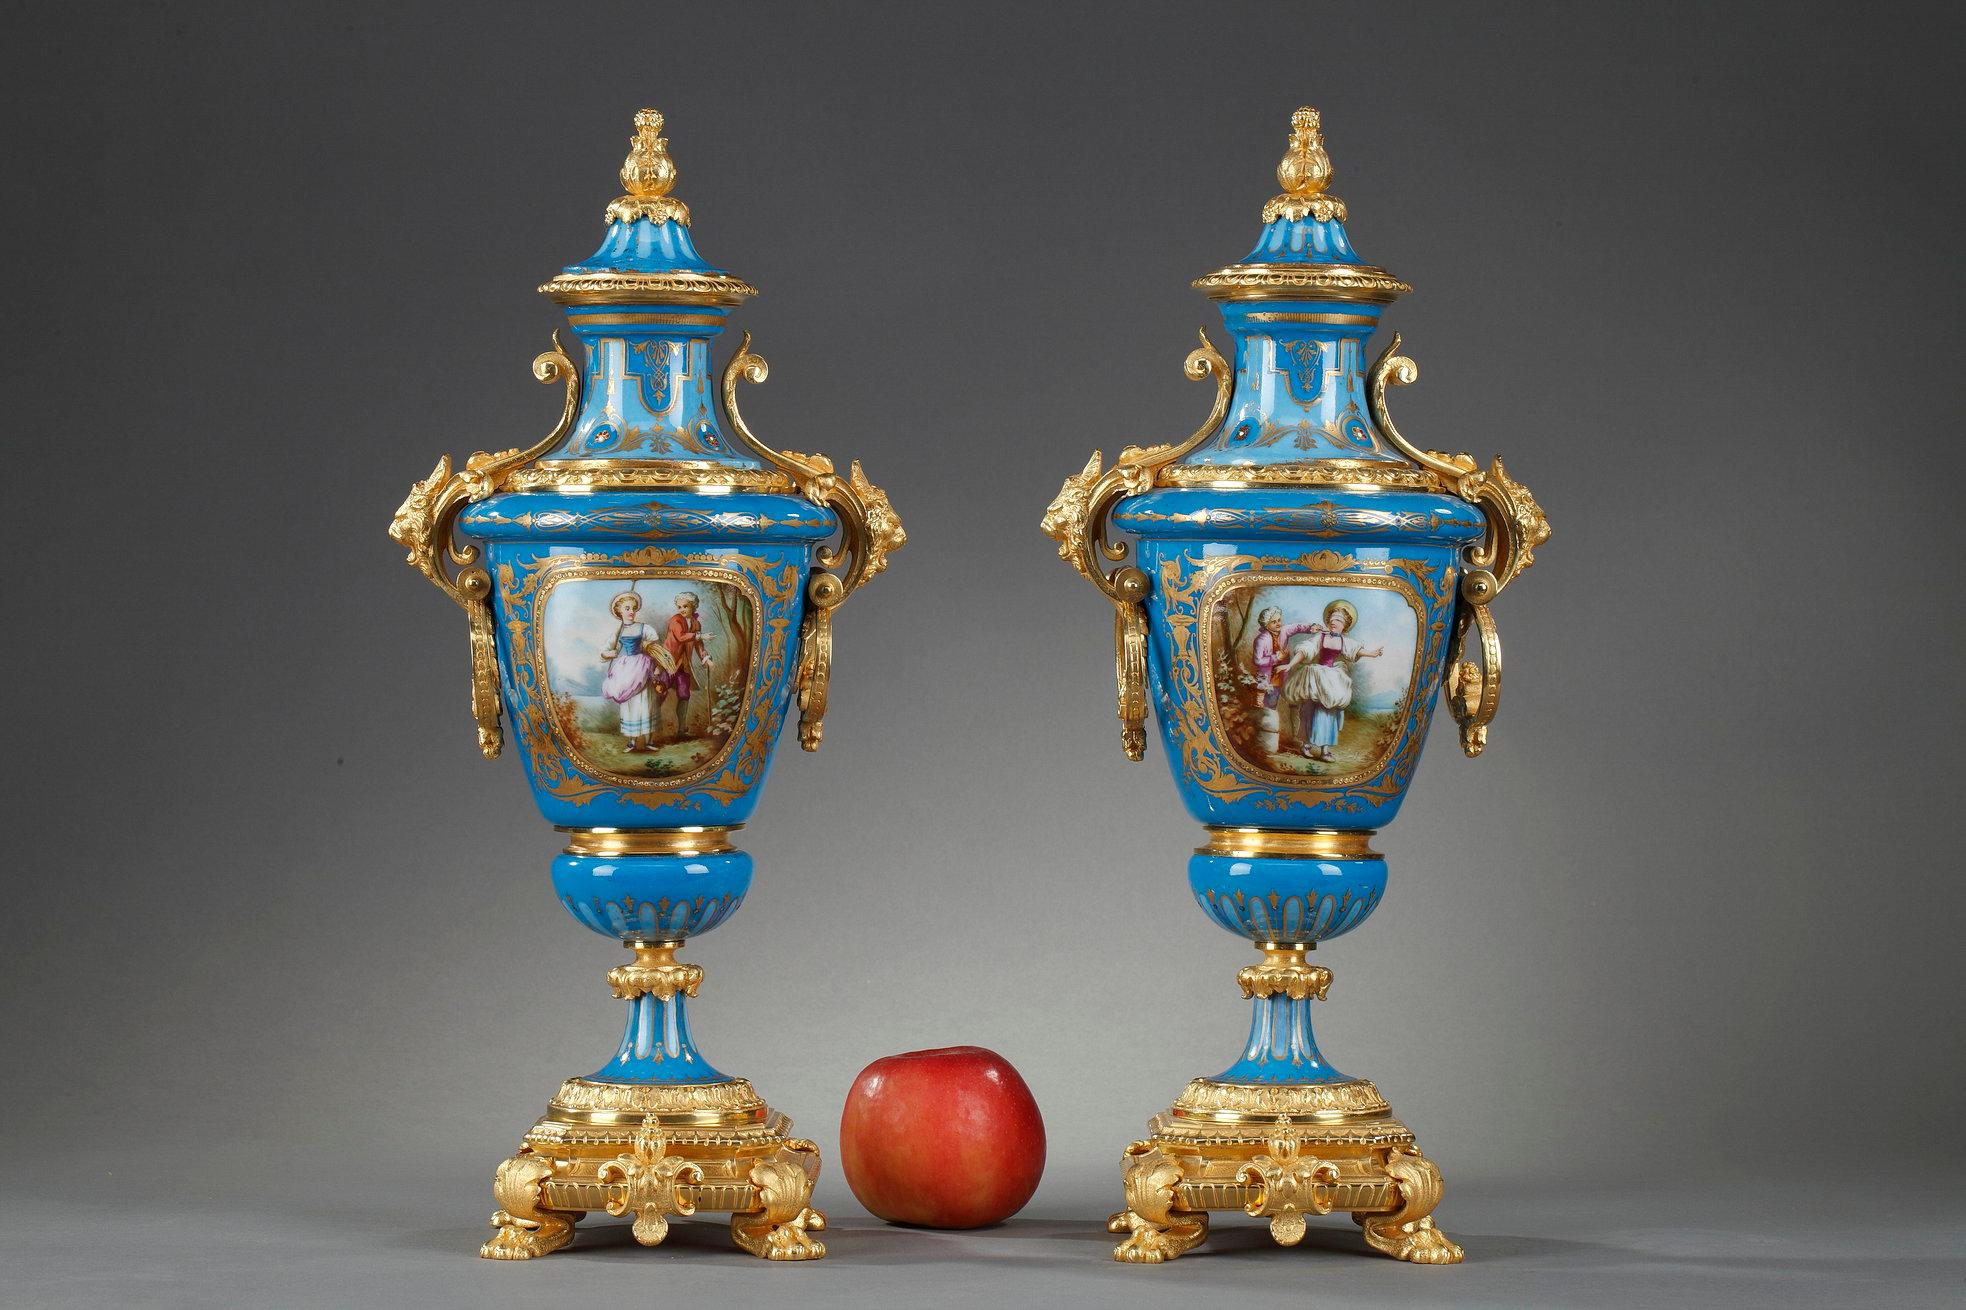 Pair of covered polychrome porcelain vases in the style of Sèvres with gilt bronze mounts. 

The base stands on four claw feet and cartouches in the form of cut leather decorated with shells. The gilt bronze handles are decorated with lion's head